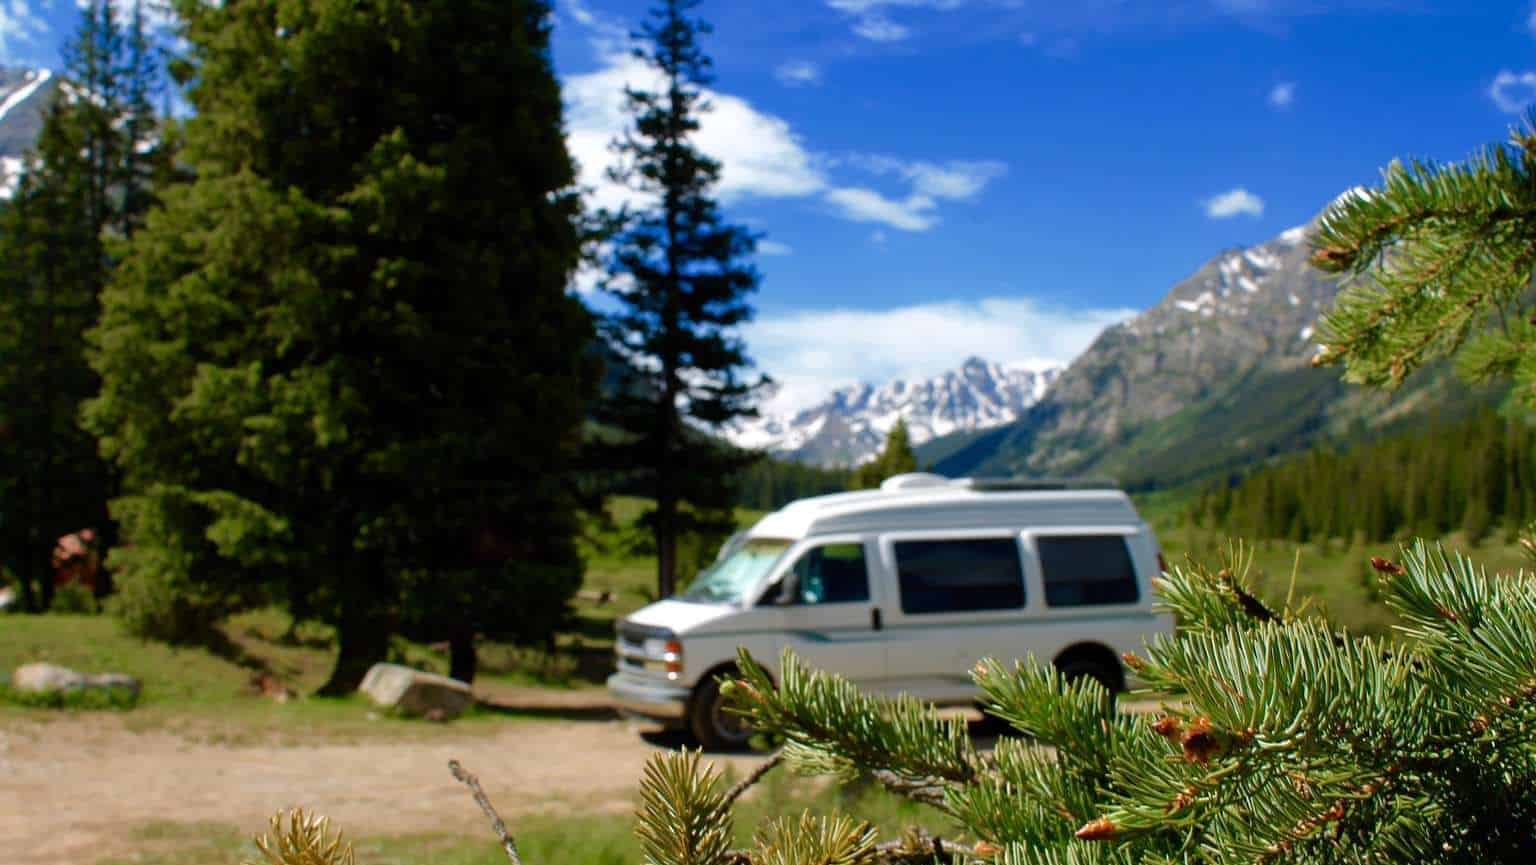 A van in the mountains in the middle ground. Snow-capped peaks behind, pine needles in focus. Van Life or Boat Life